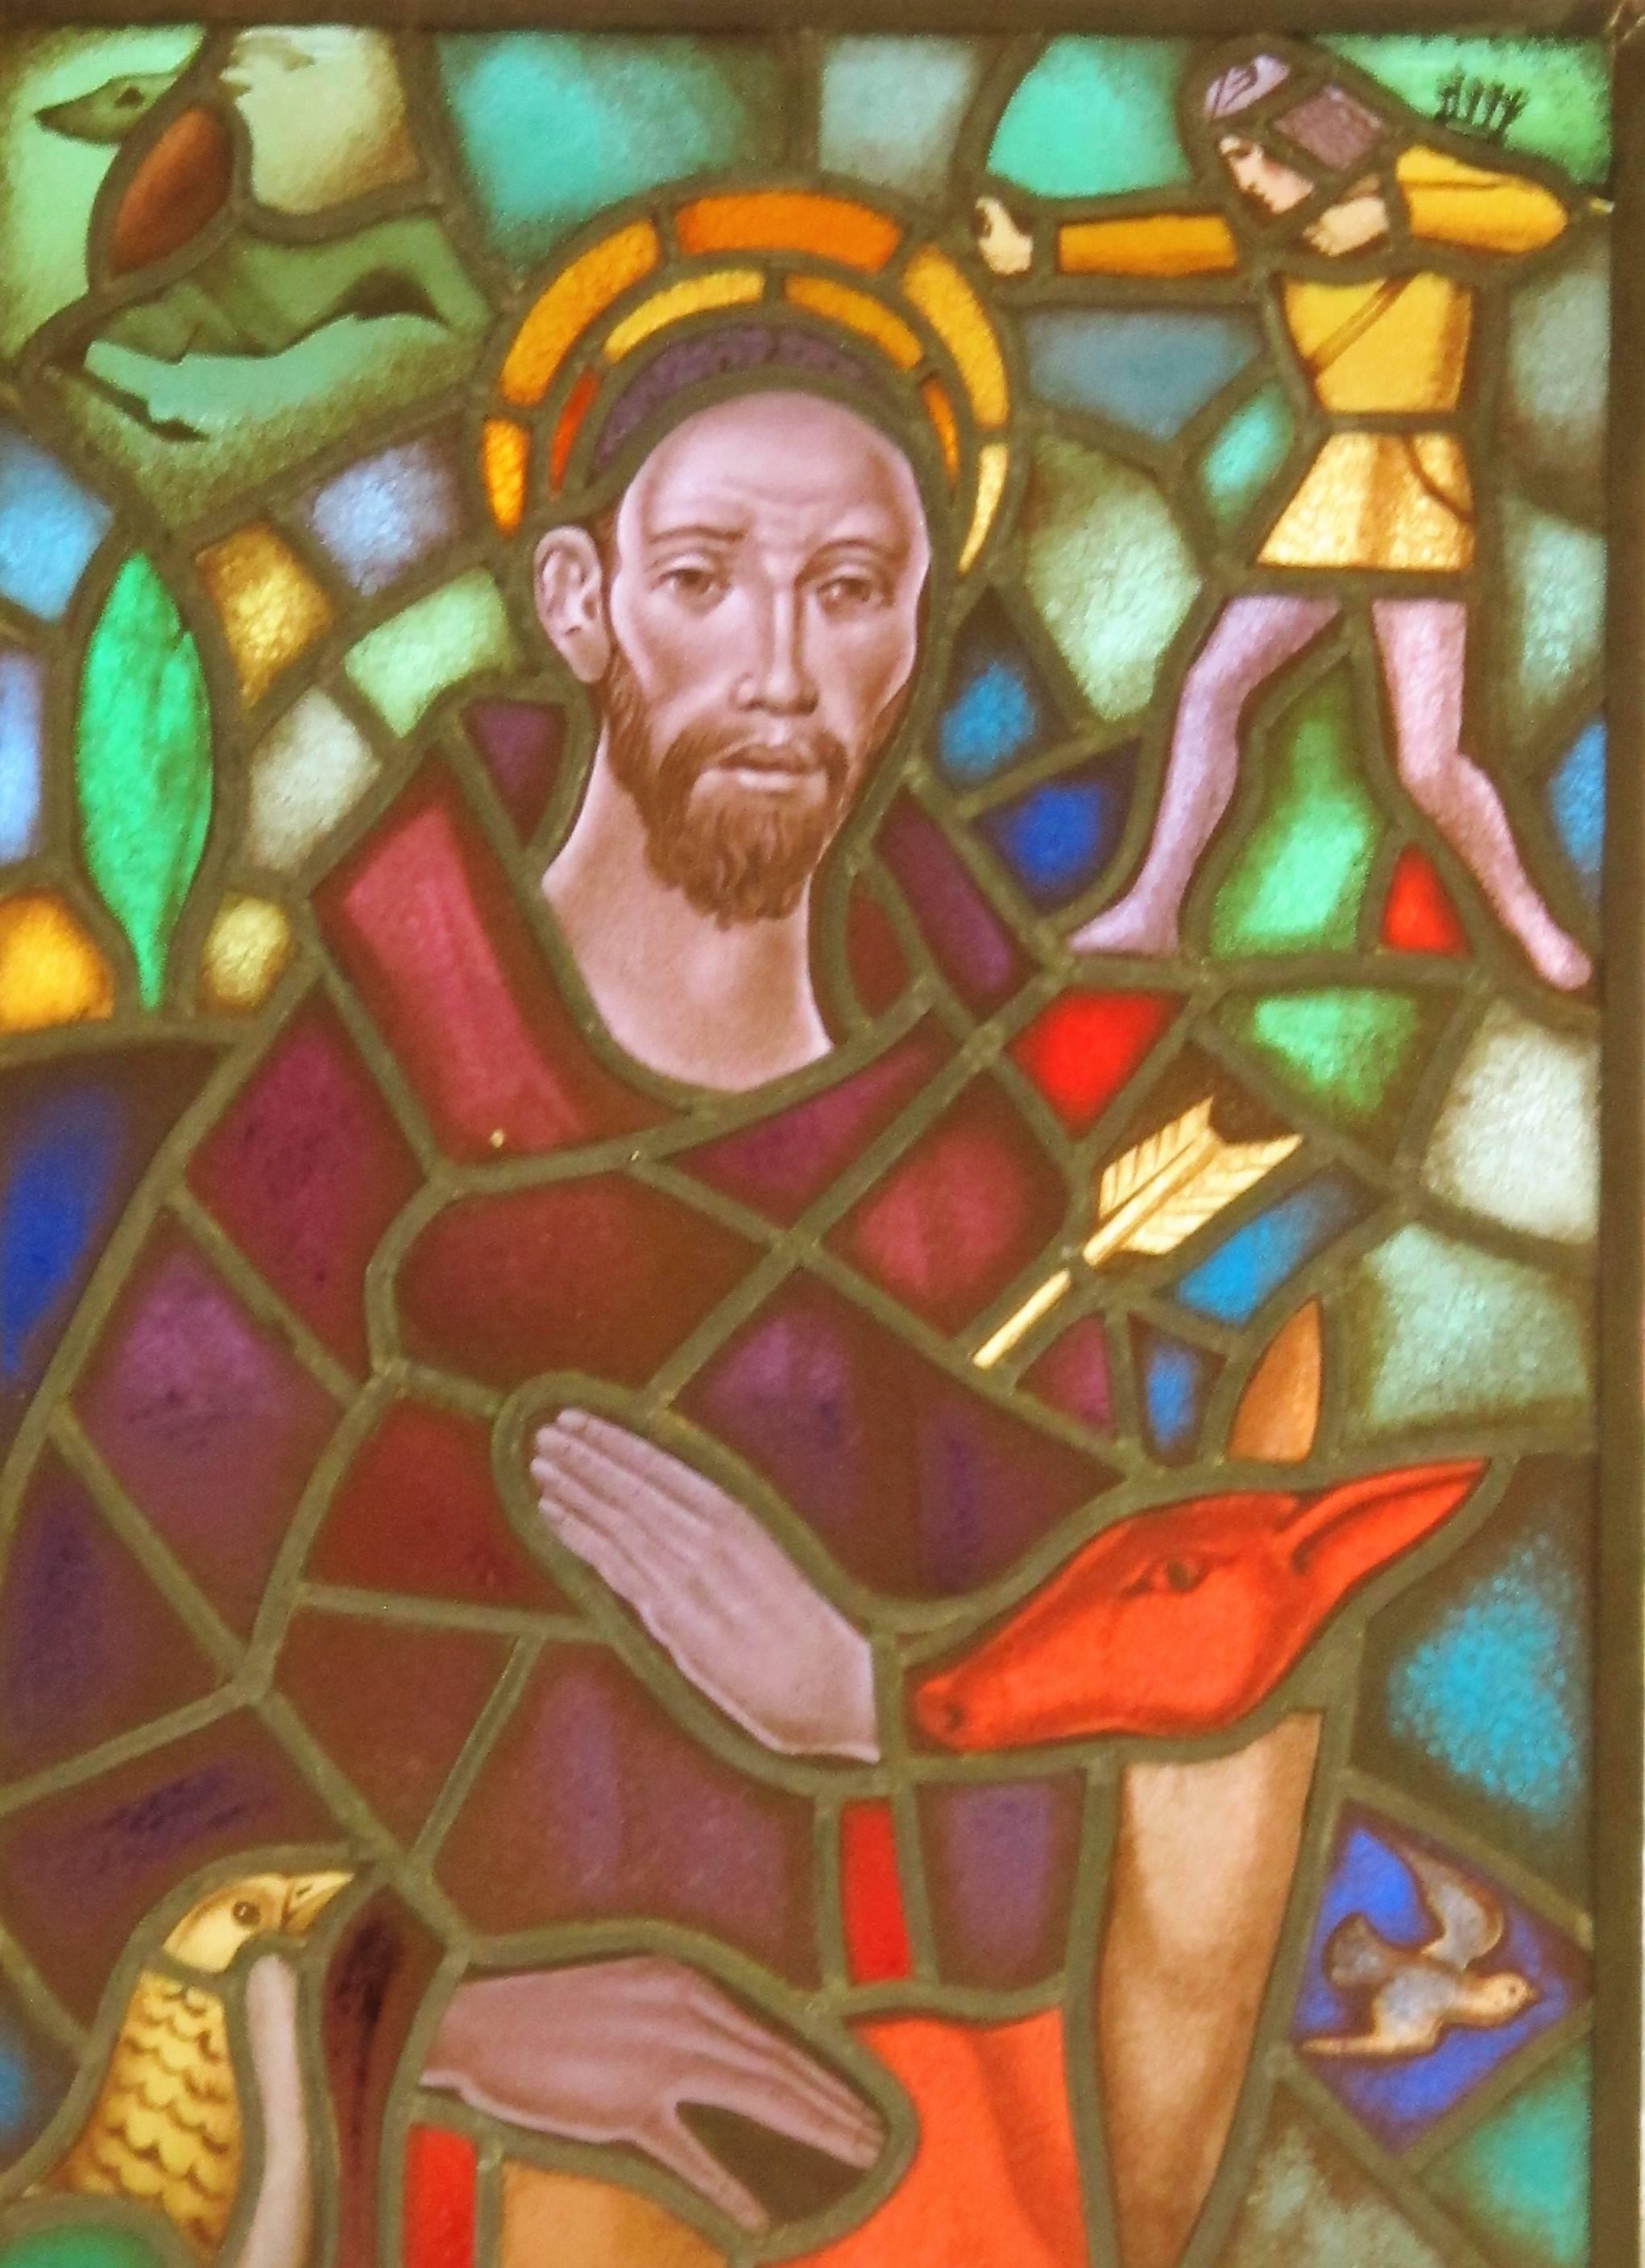 Beautiful coloured stained glass panel depicting St. Hubertus. Designed by Henri van der Stok (1870-1946) en manufactured by Hans Liefkes (1891-1967) at Atelier Liefkes, Den Haag.

.